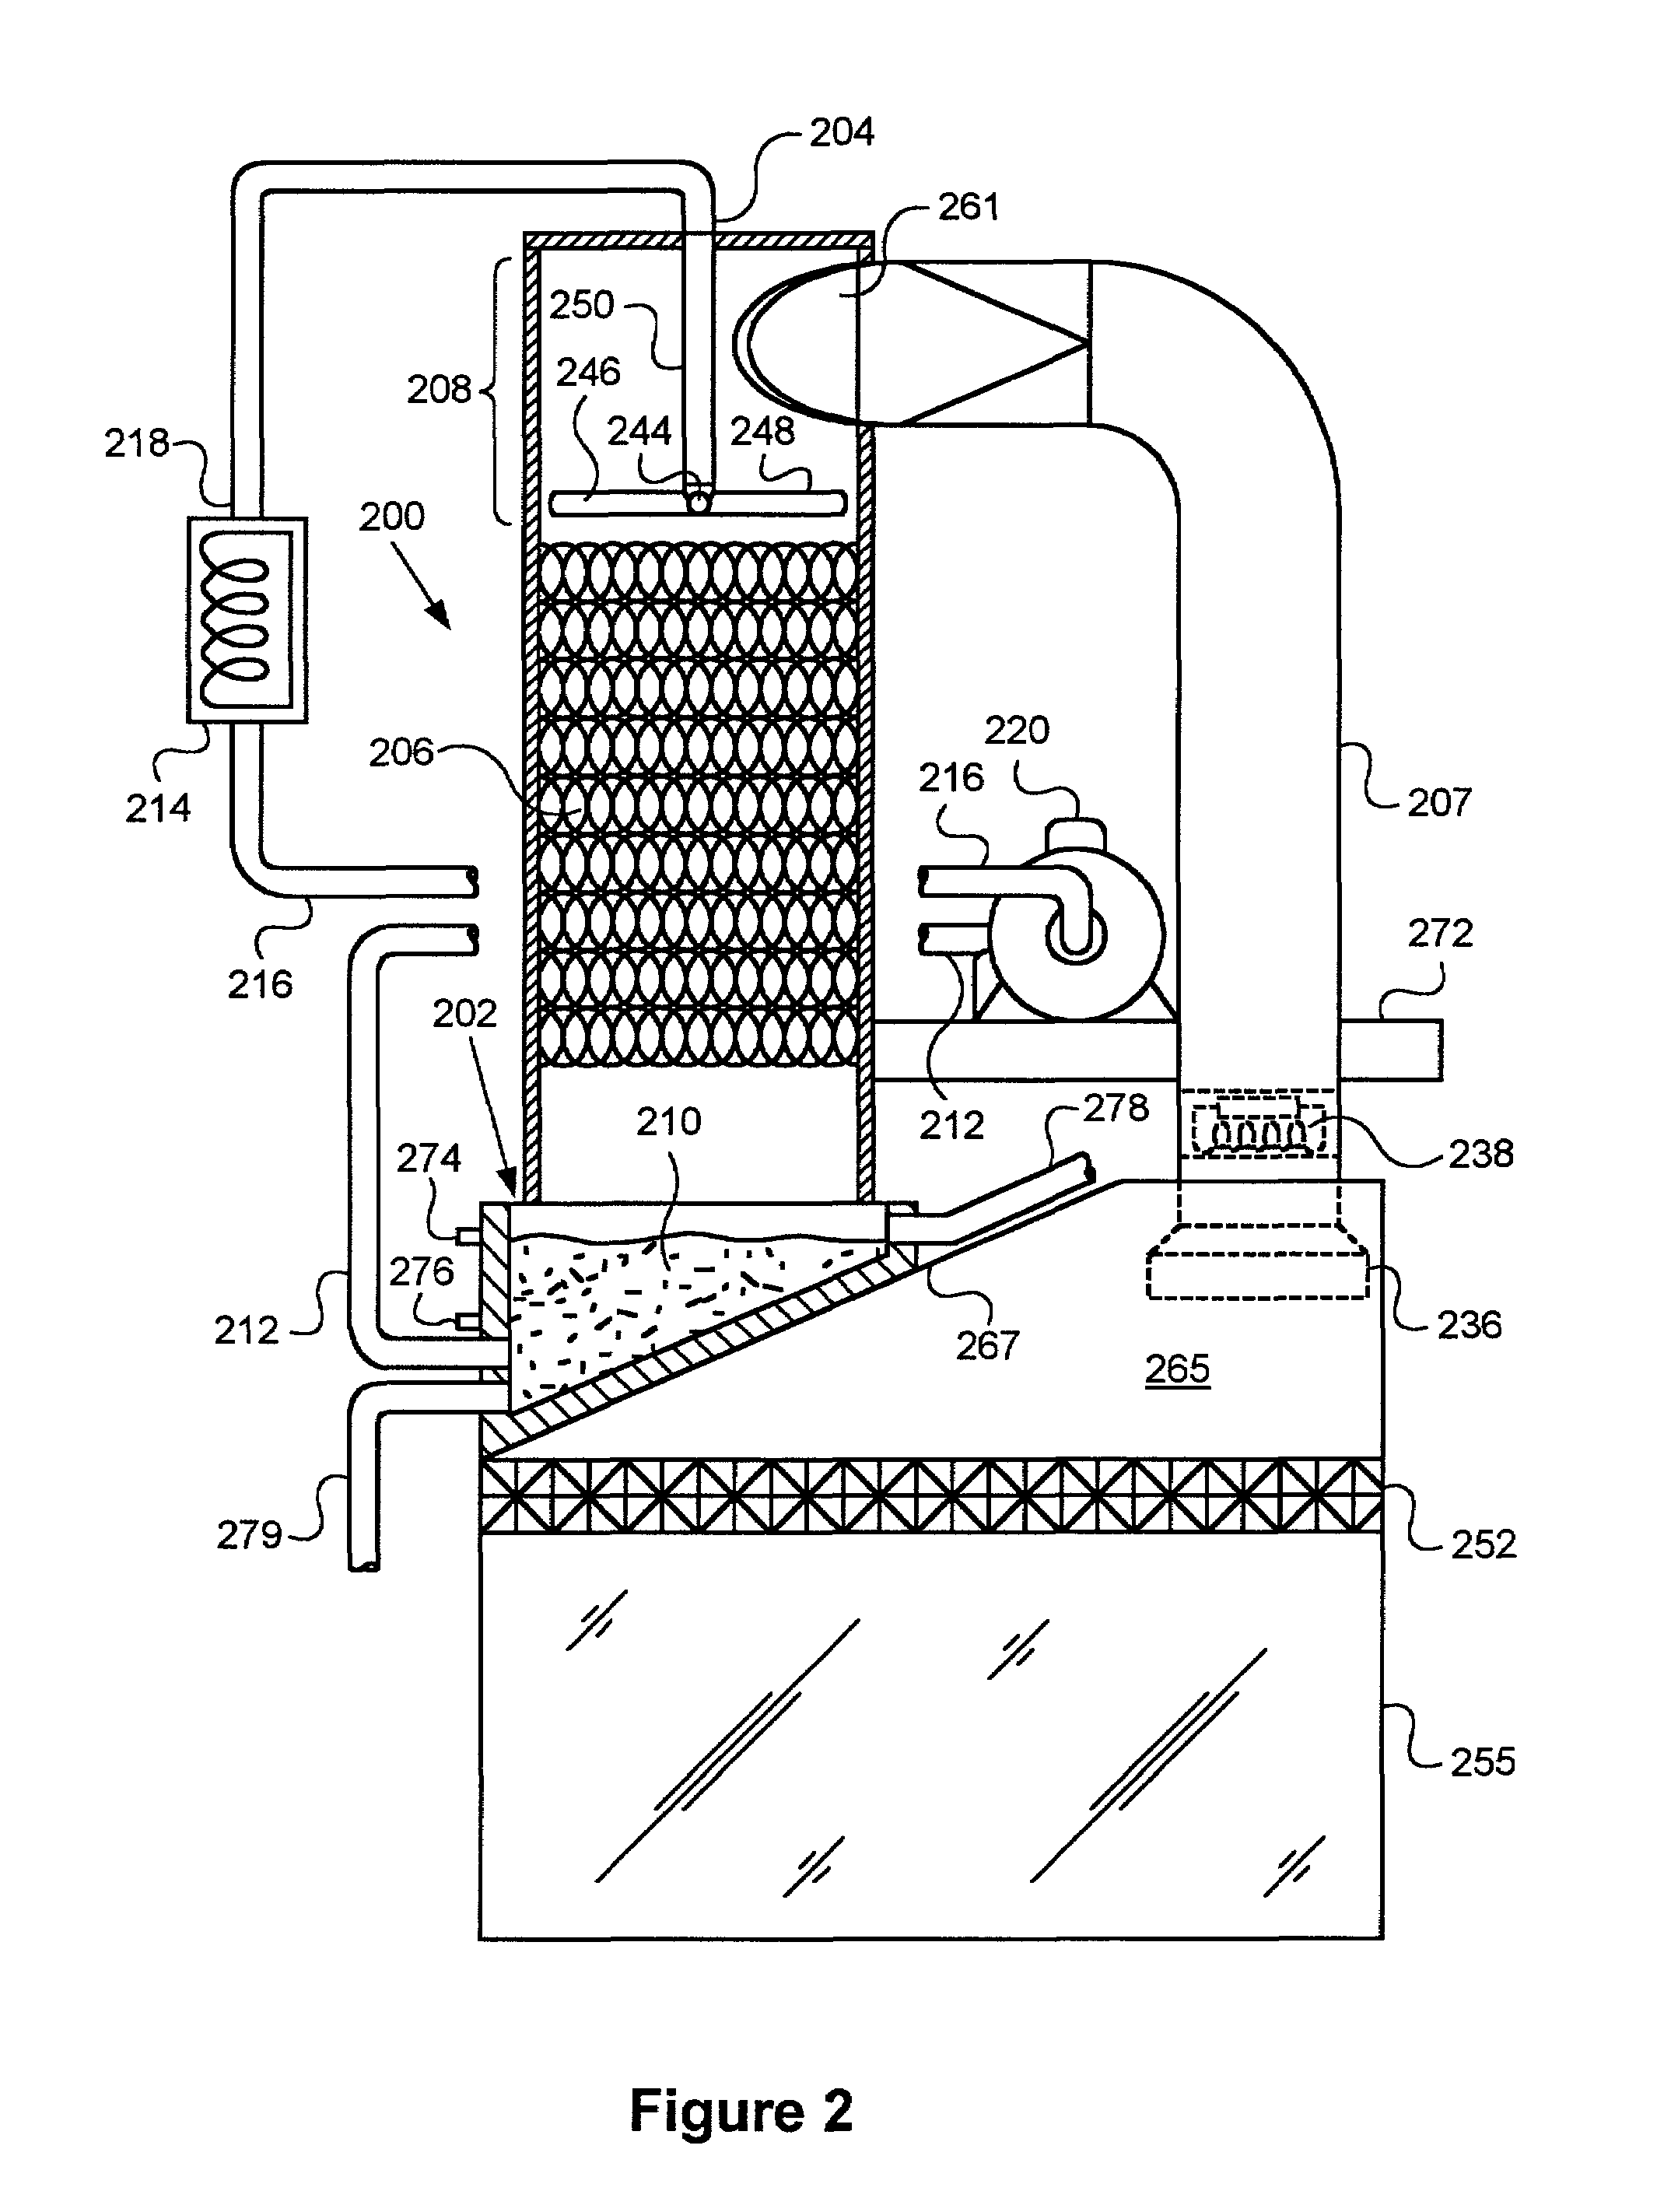 Systems and methods for controlling local environment